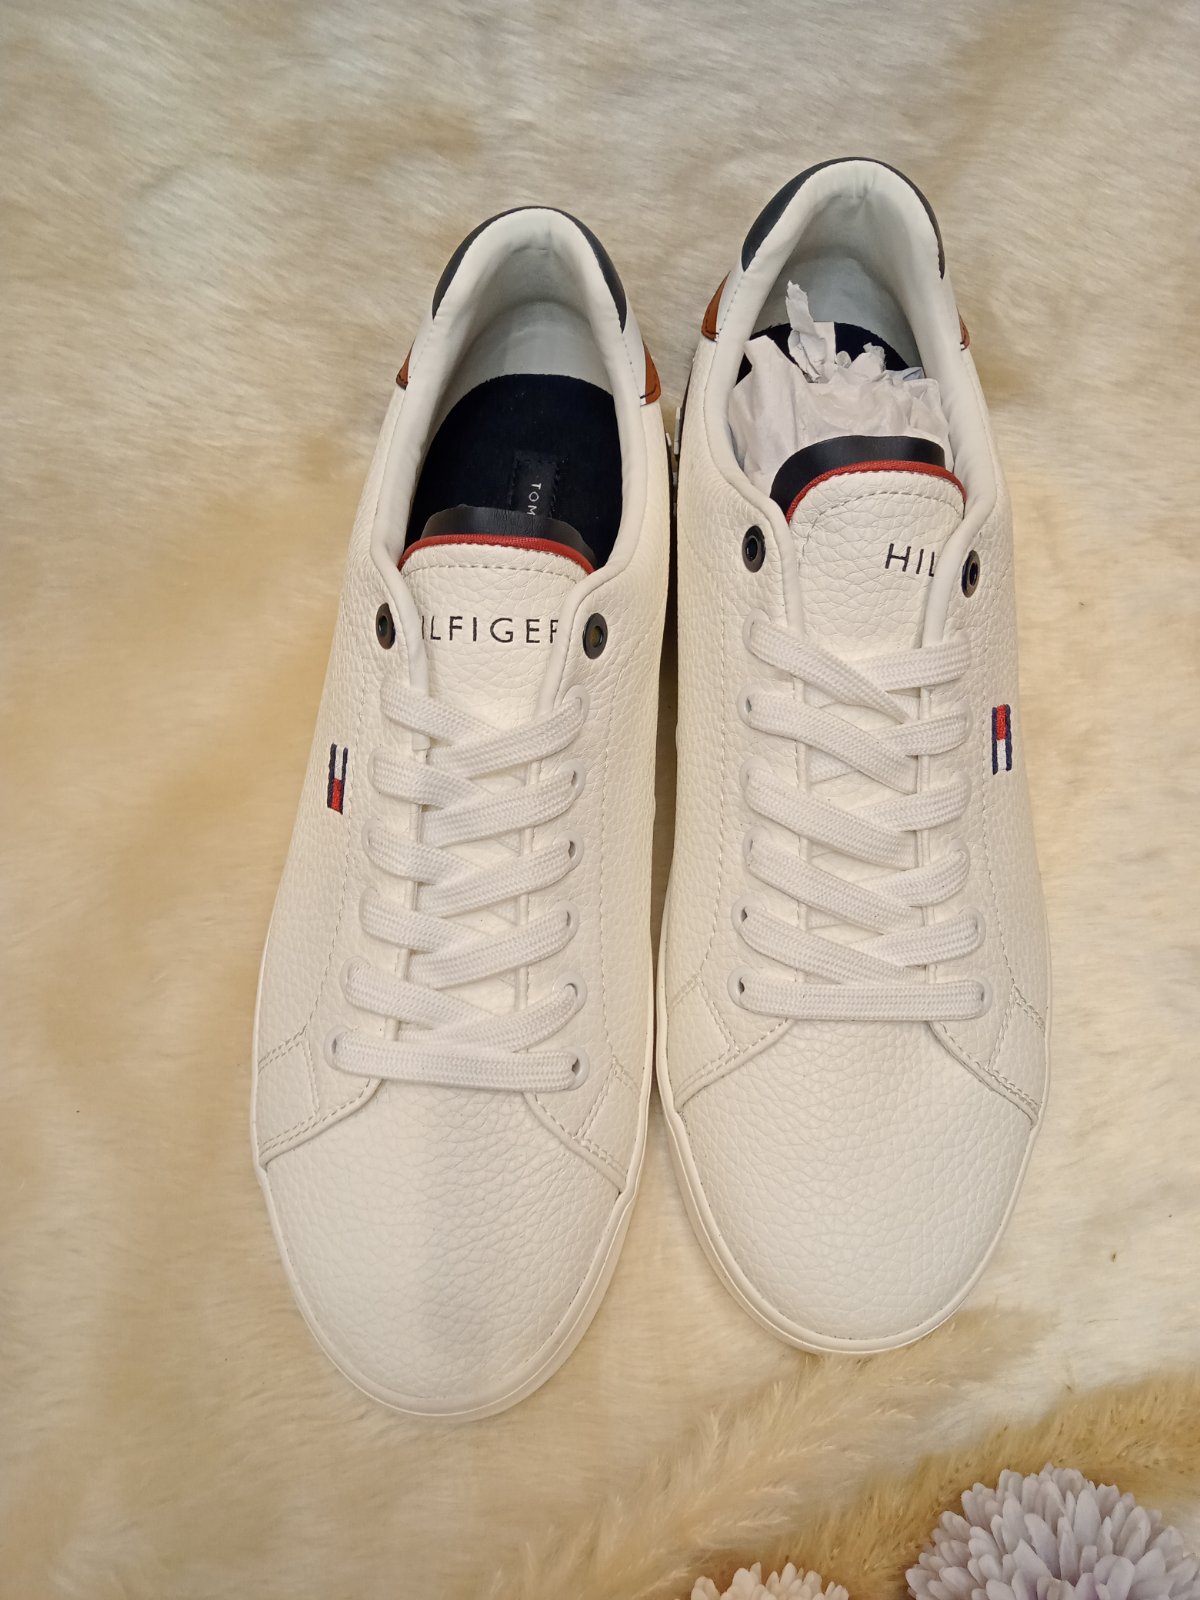 TOMMY HILFIGER SHOES FOR MEN'S REZZ WHITE SIZE 9 - Curate